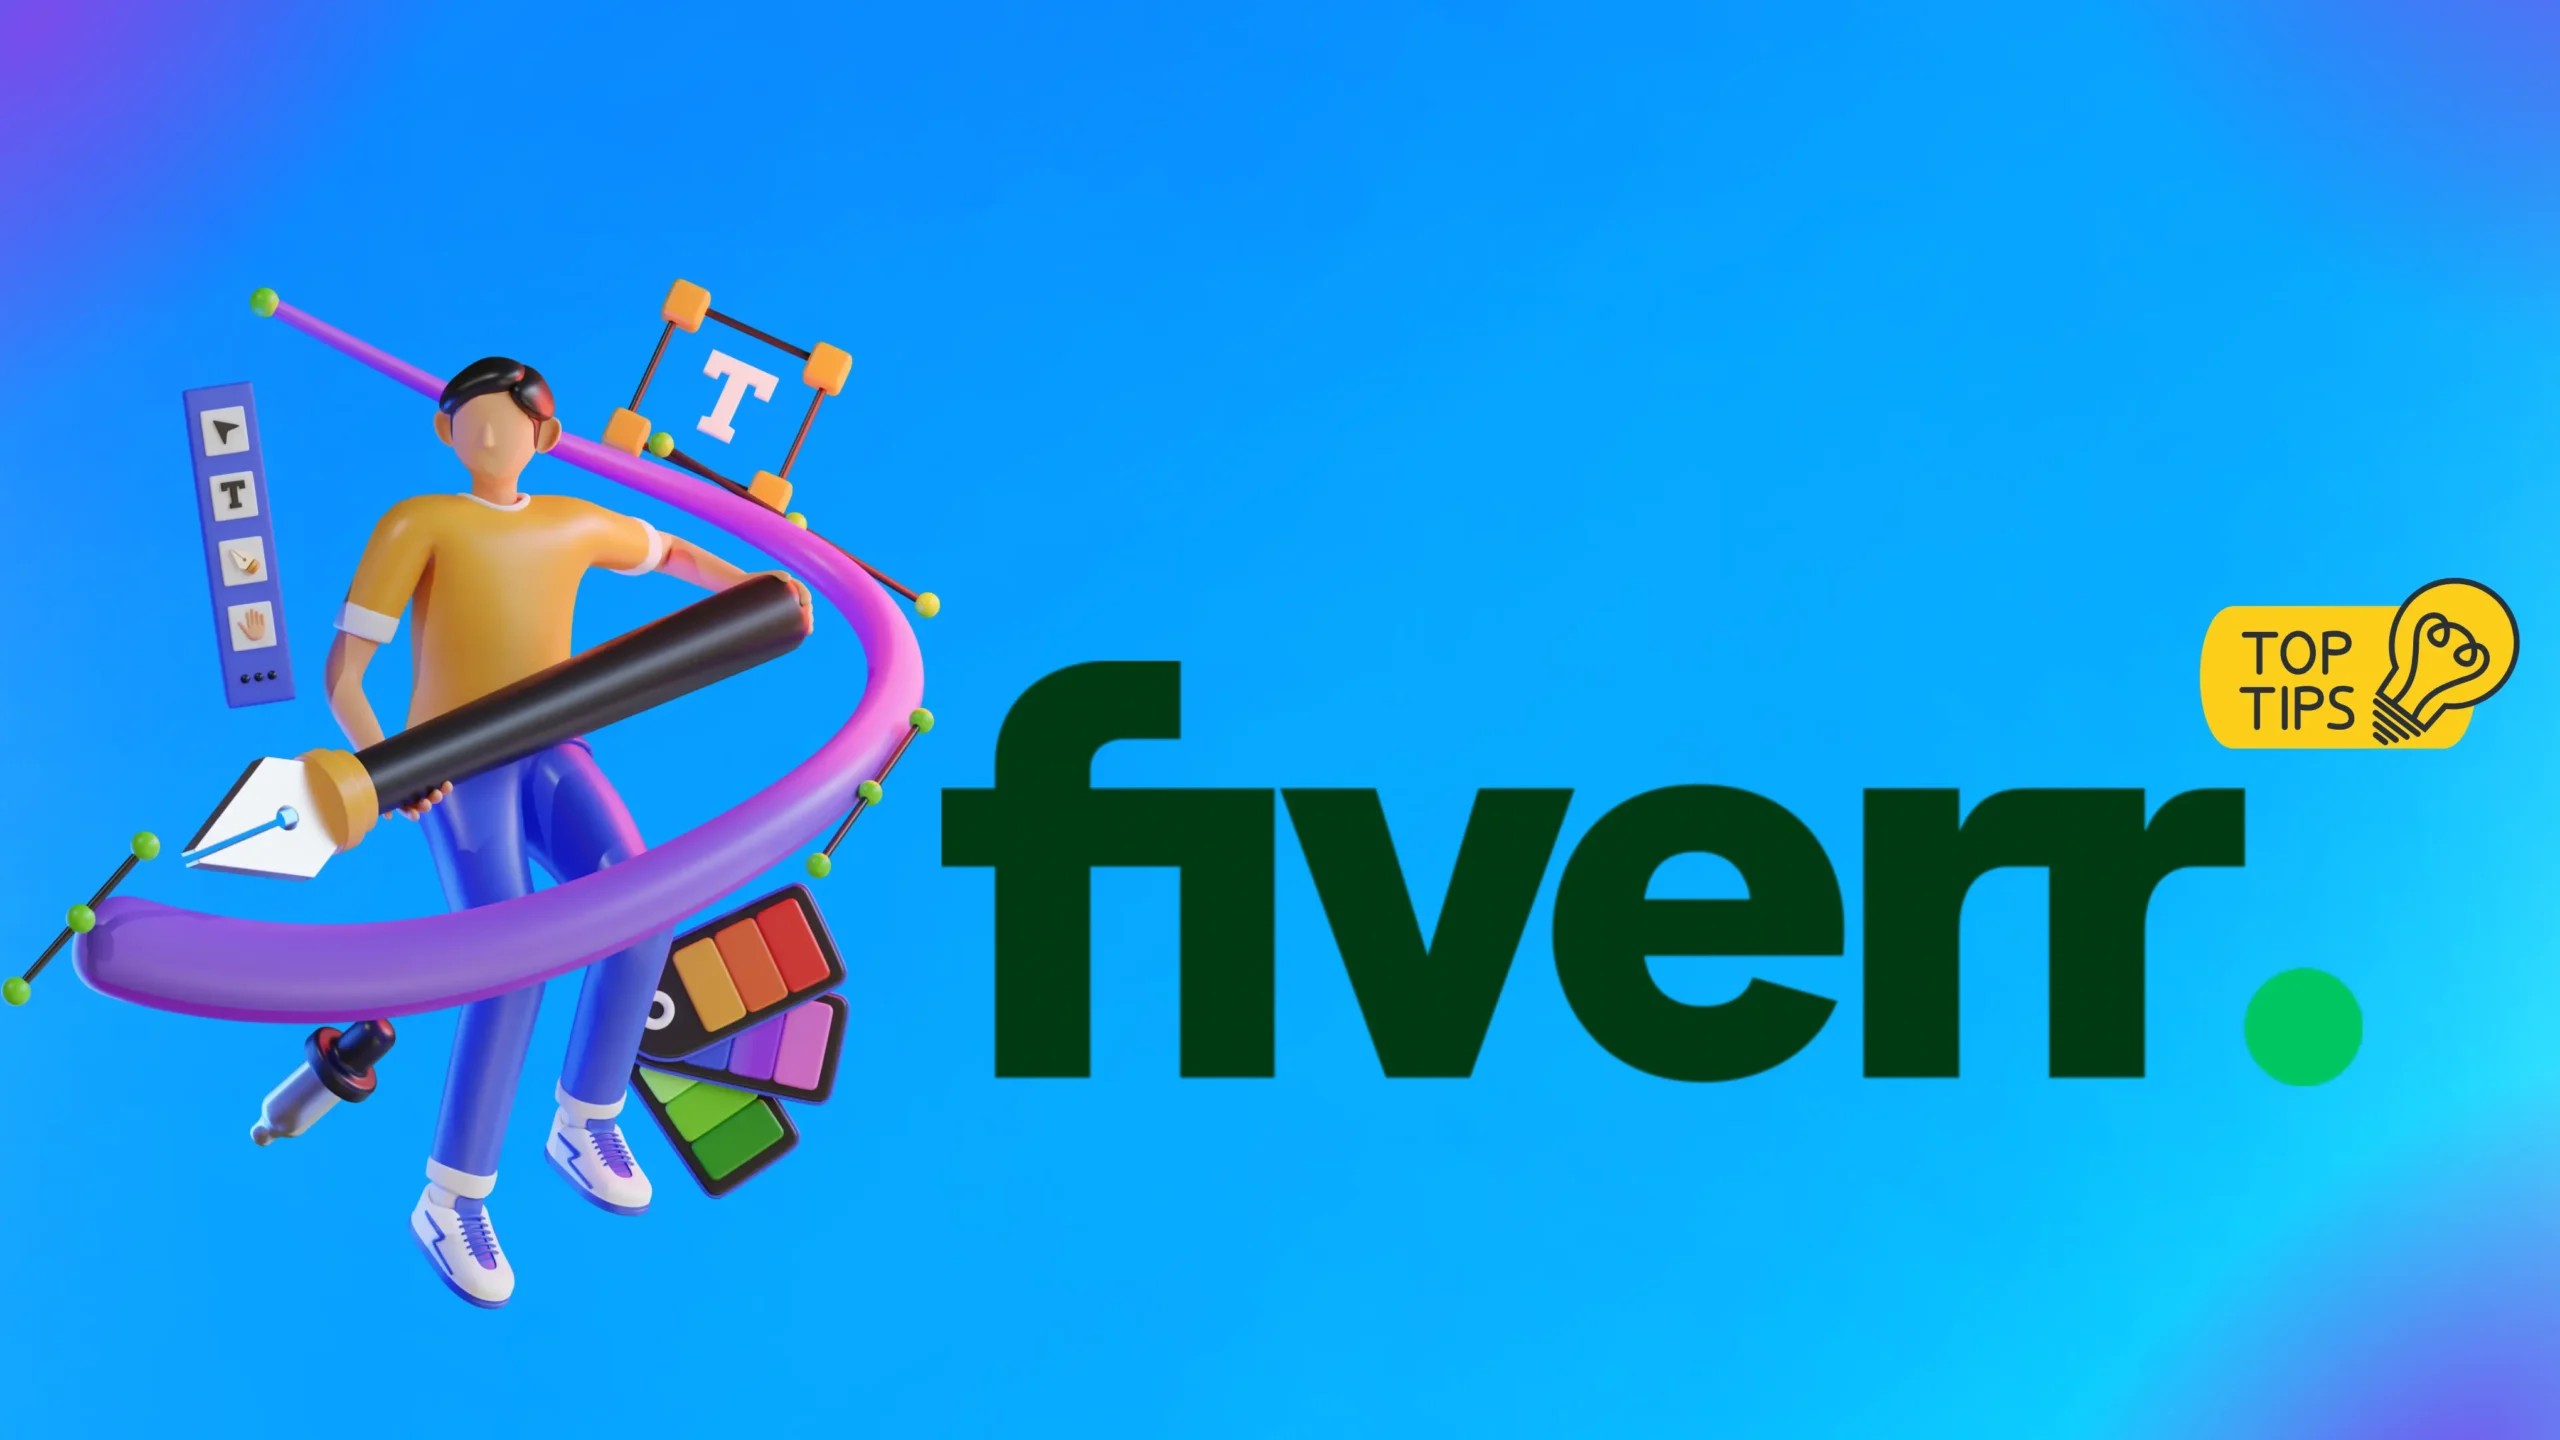 Top 7 Strategies to Make Money on Fiverr as a Graphic Designer in 2023